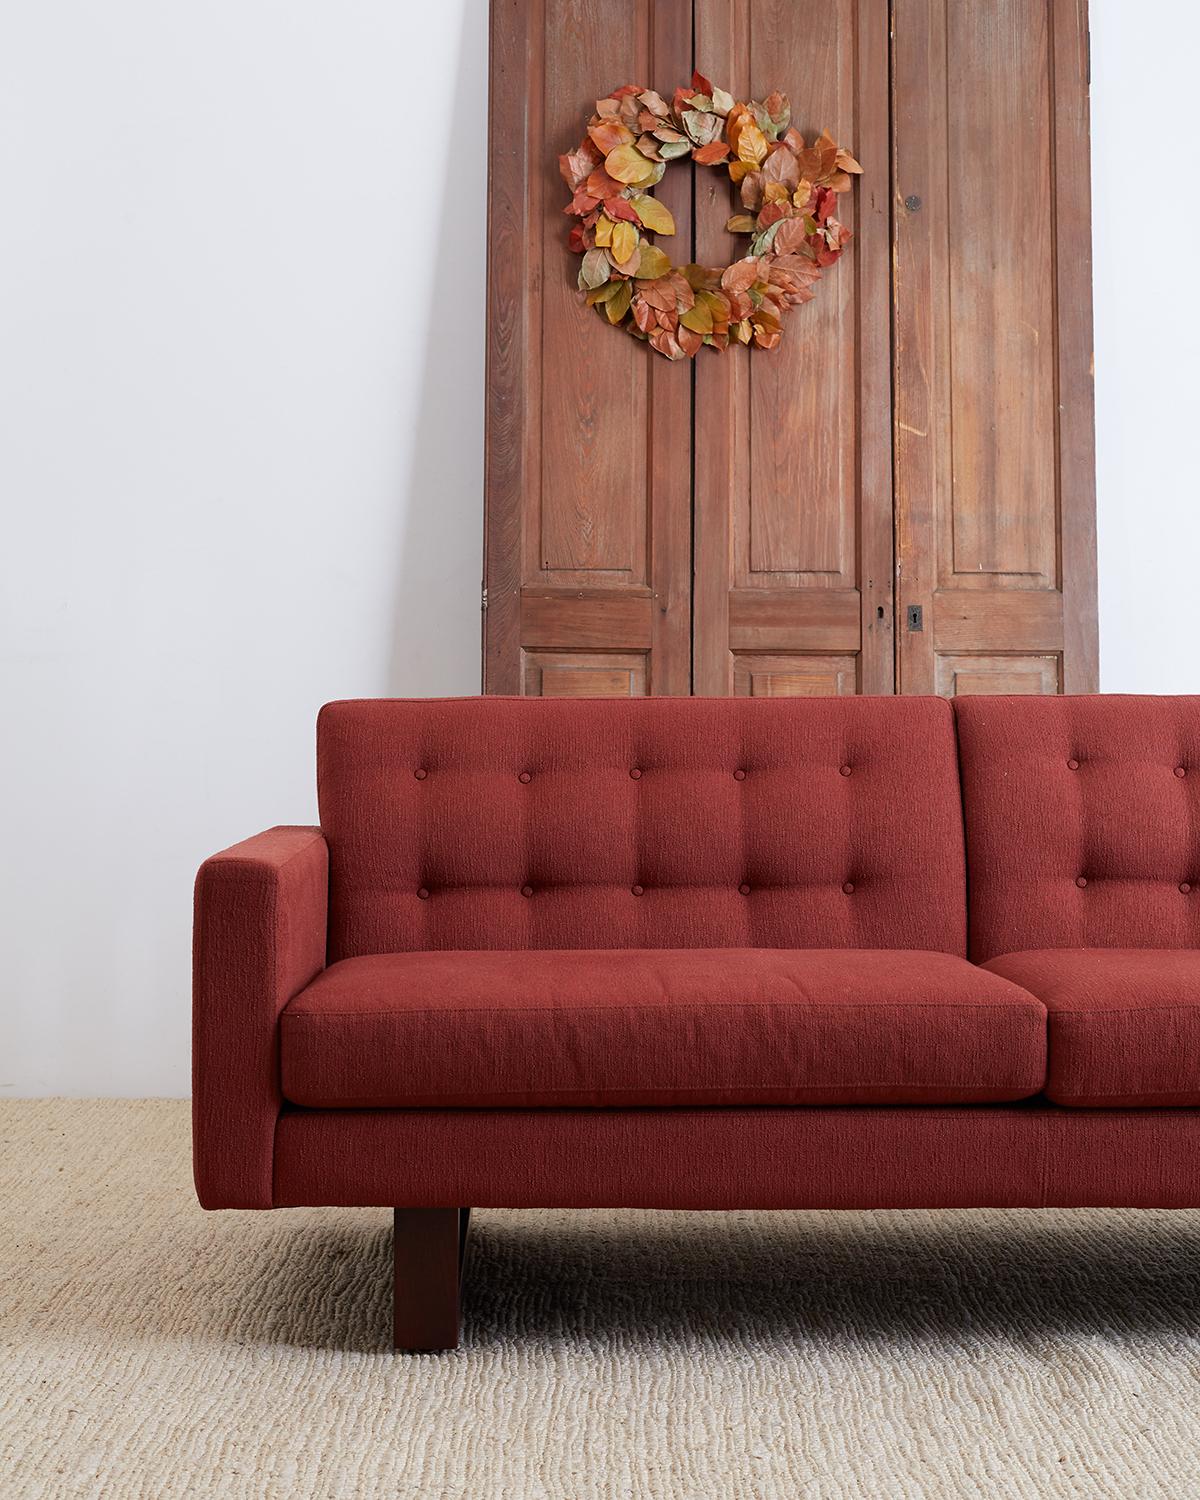 Midcentury style sofa by Room and Board featuring a festive cranberry upholstery. Made in the style of a case sofa with two deep cushion seat pads and a tufted back. Clean modern style with wooden cube shaped legs to complement the design. Very good